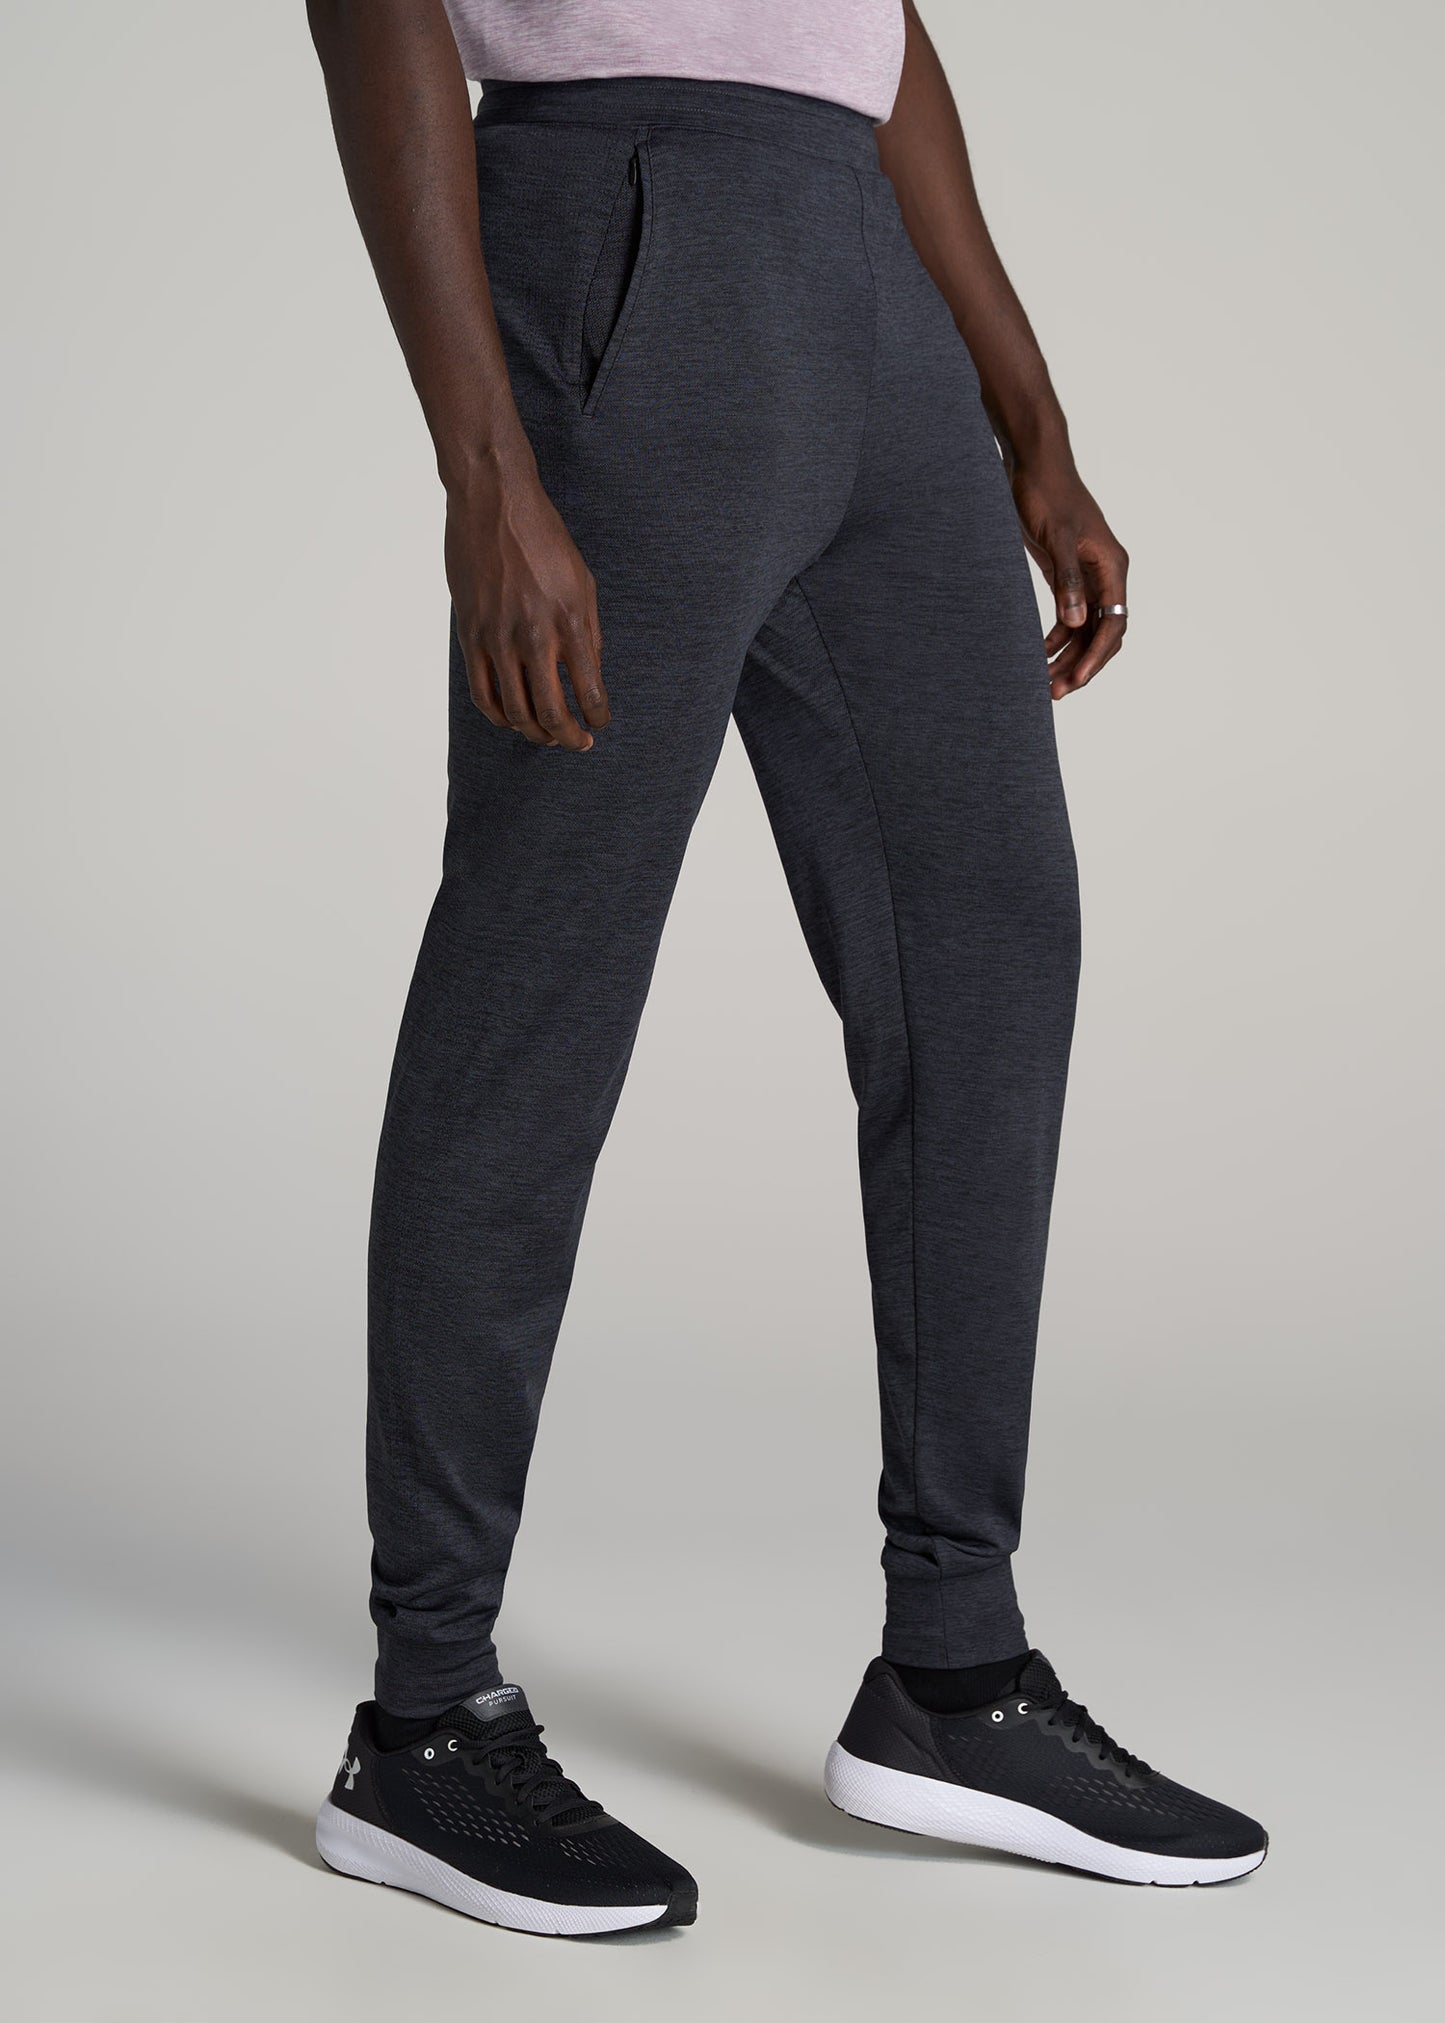 How to Style Sweatpants & Joggers: 10 Fashion Tips for Tall Men